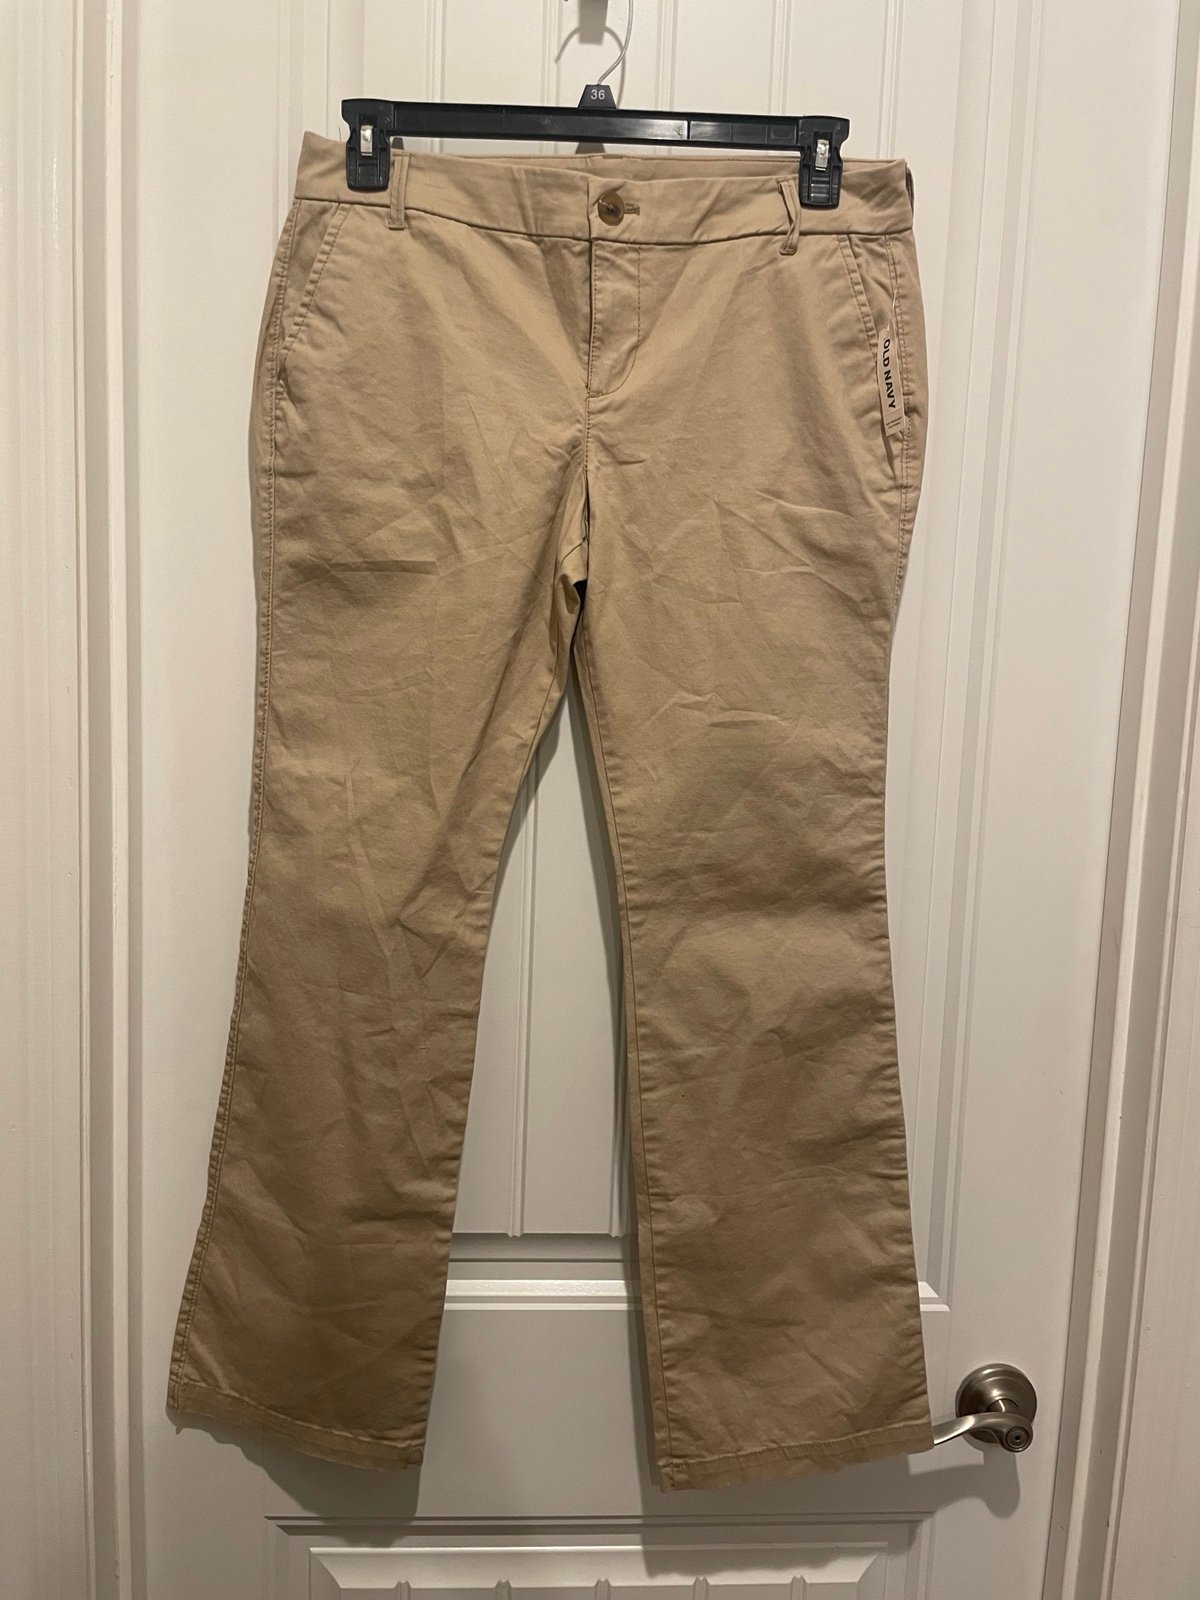 Special offer  Women’s Old Navy bootcut khaki size 10 p